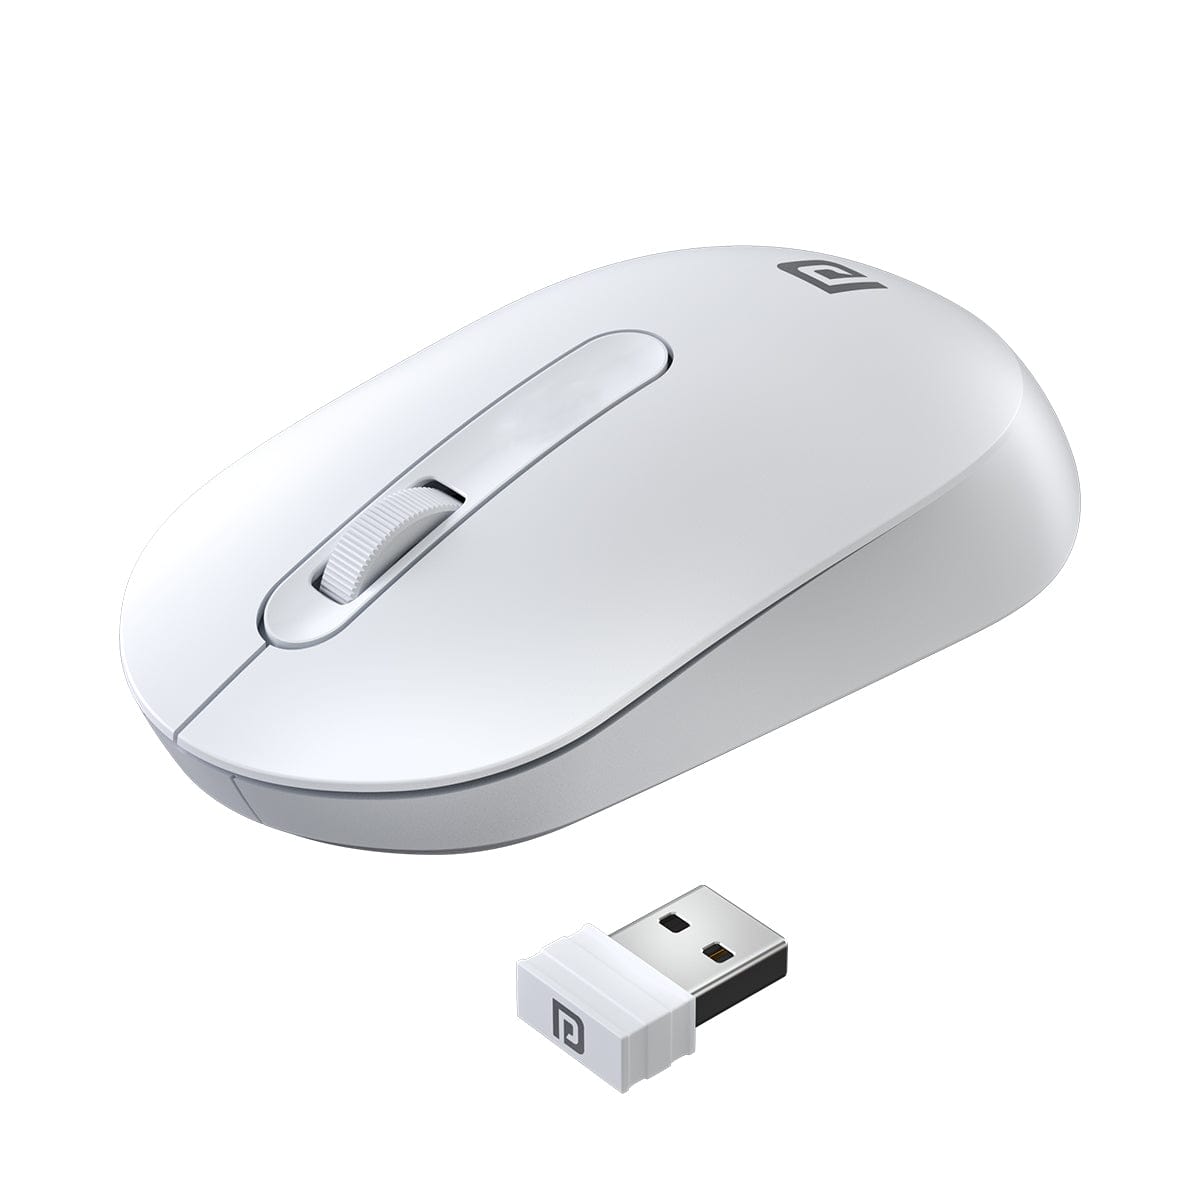 PORTRONICS-Toad 13 Wireless Optical Mouse